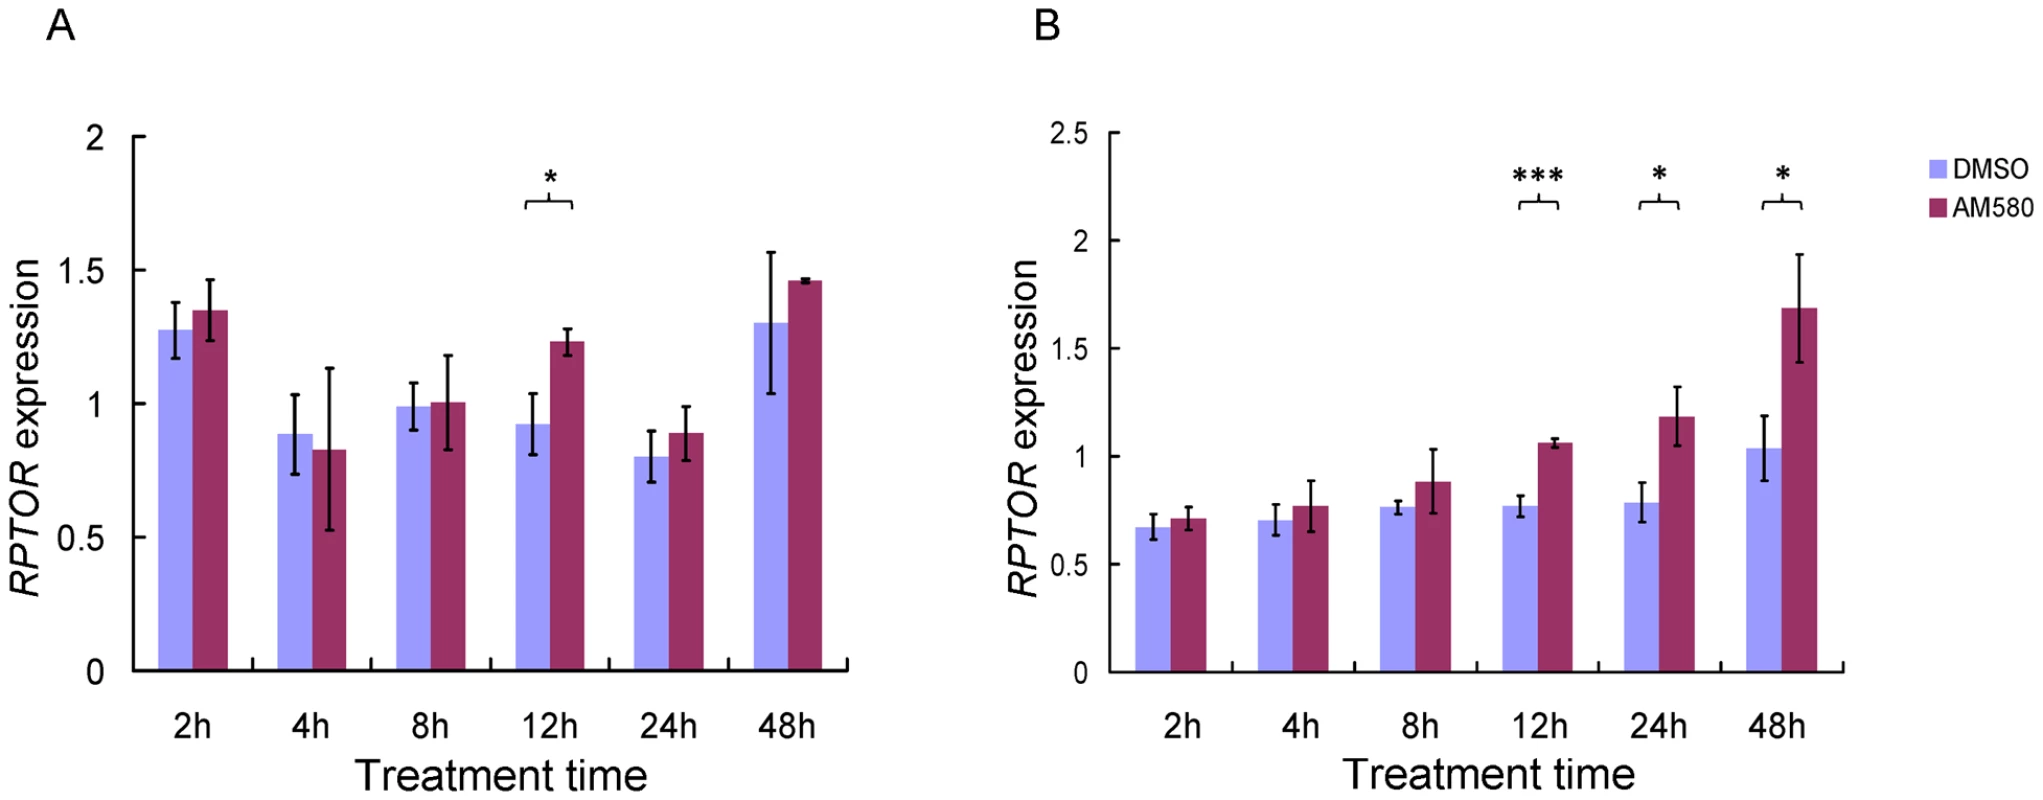 Effect of retinoids on <i>RPTOR</i> expression in HepG2 (A) and MCF-7 (B) cell lines at different treatment times.